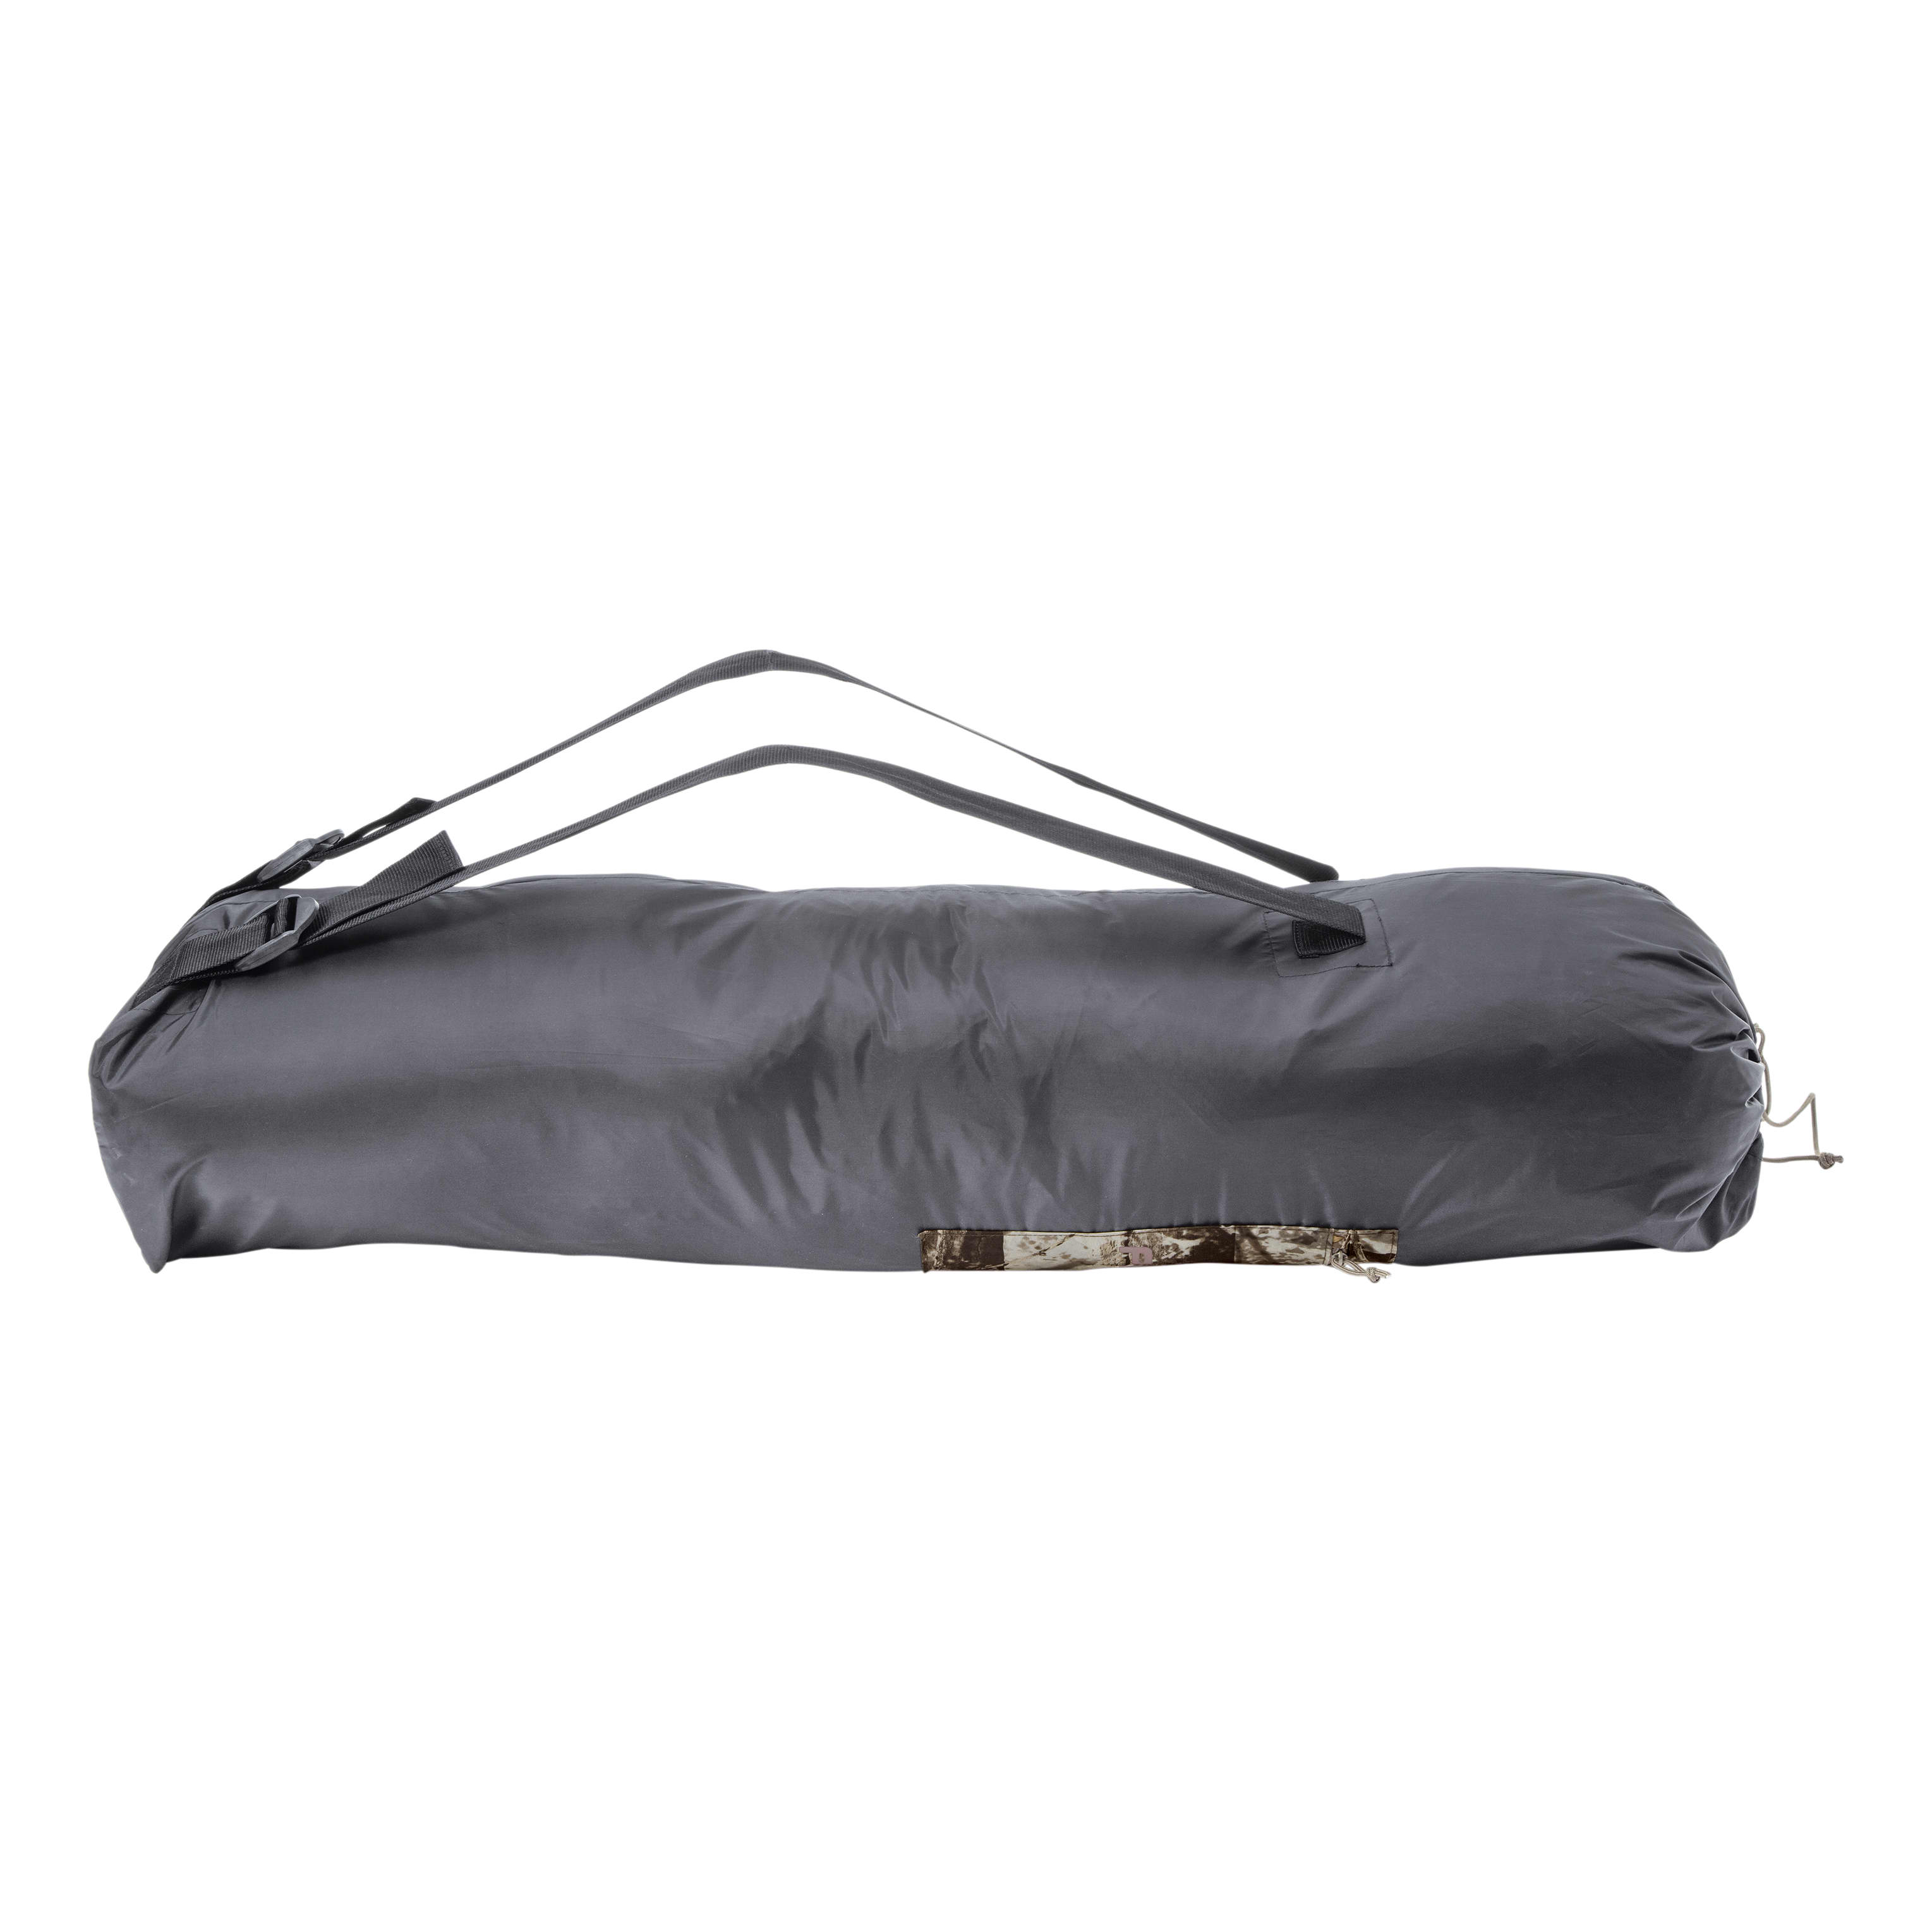 Pursuit Hub Ground Blind - Carry Bag View